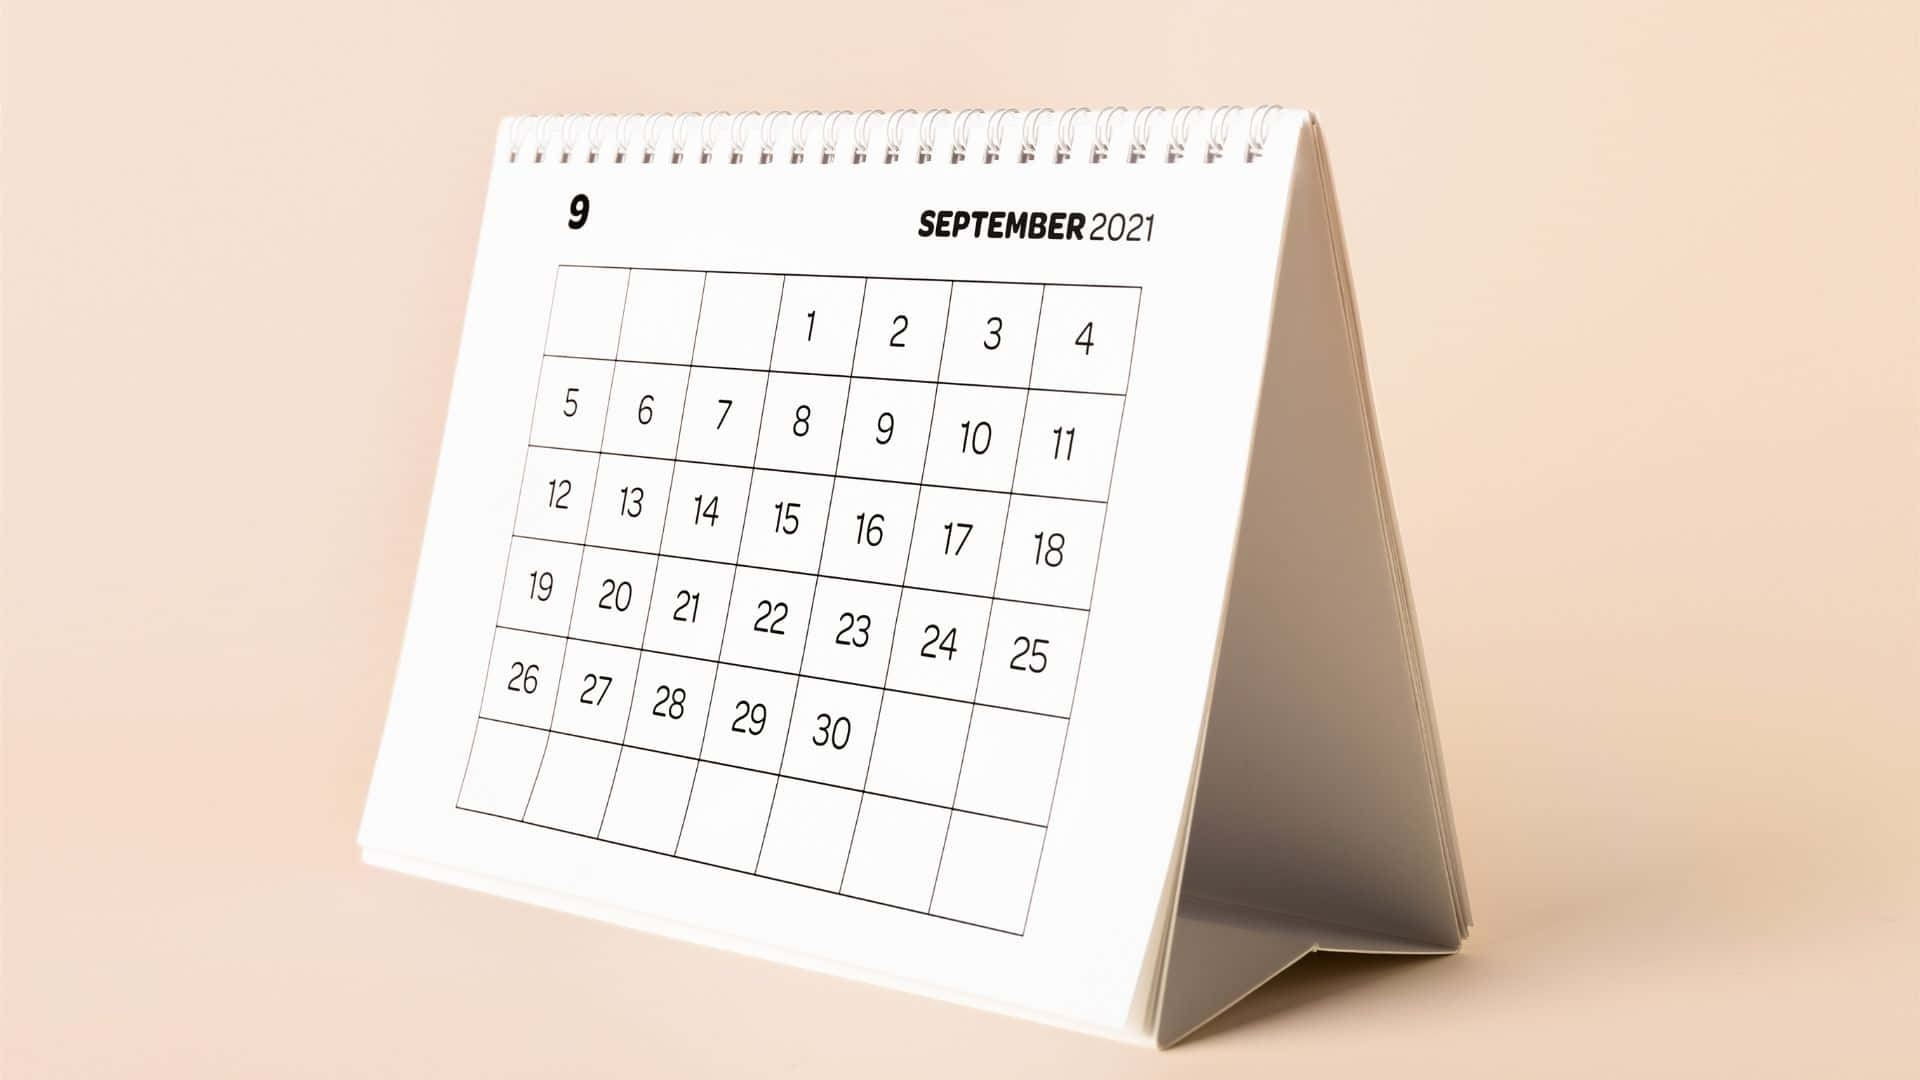 “Plan Ahead For the Month with this September 2021 Calendar” Wallpaper